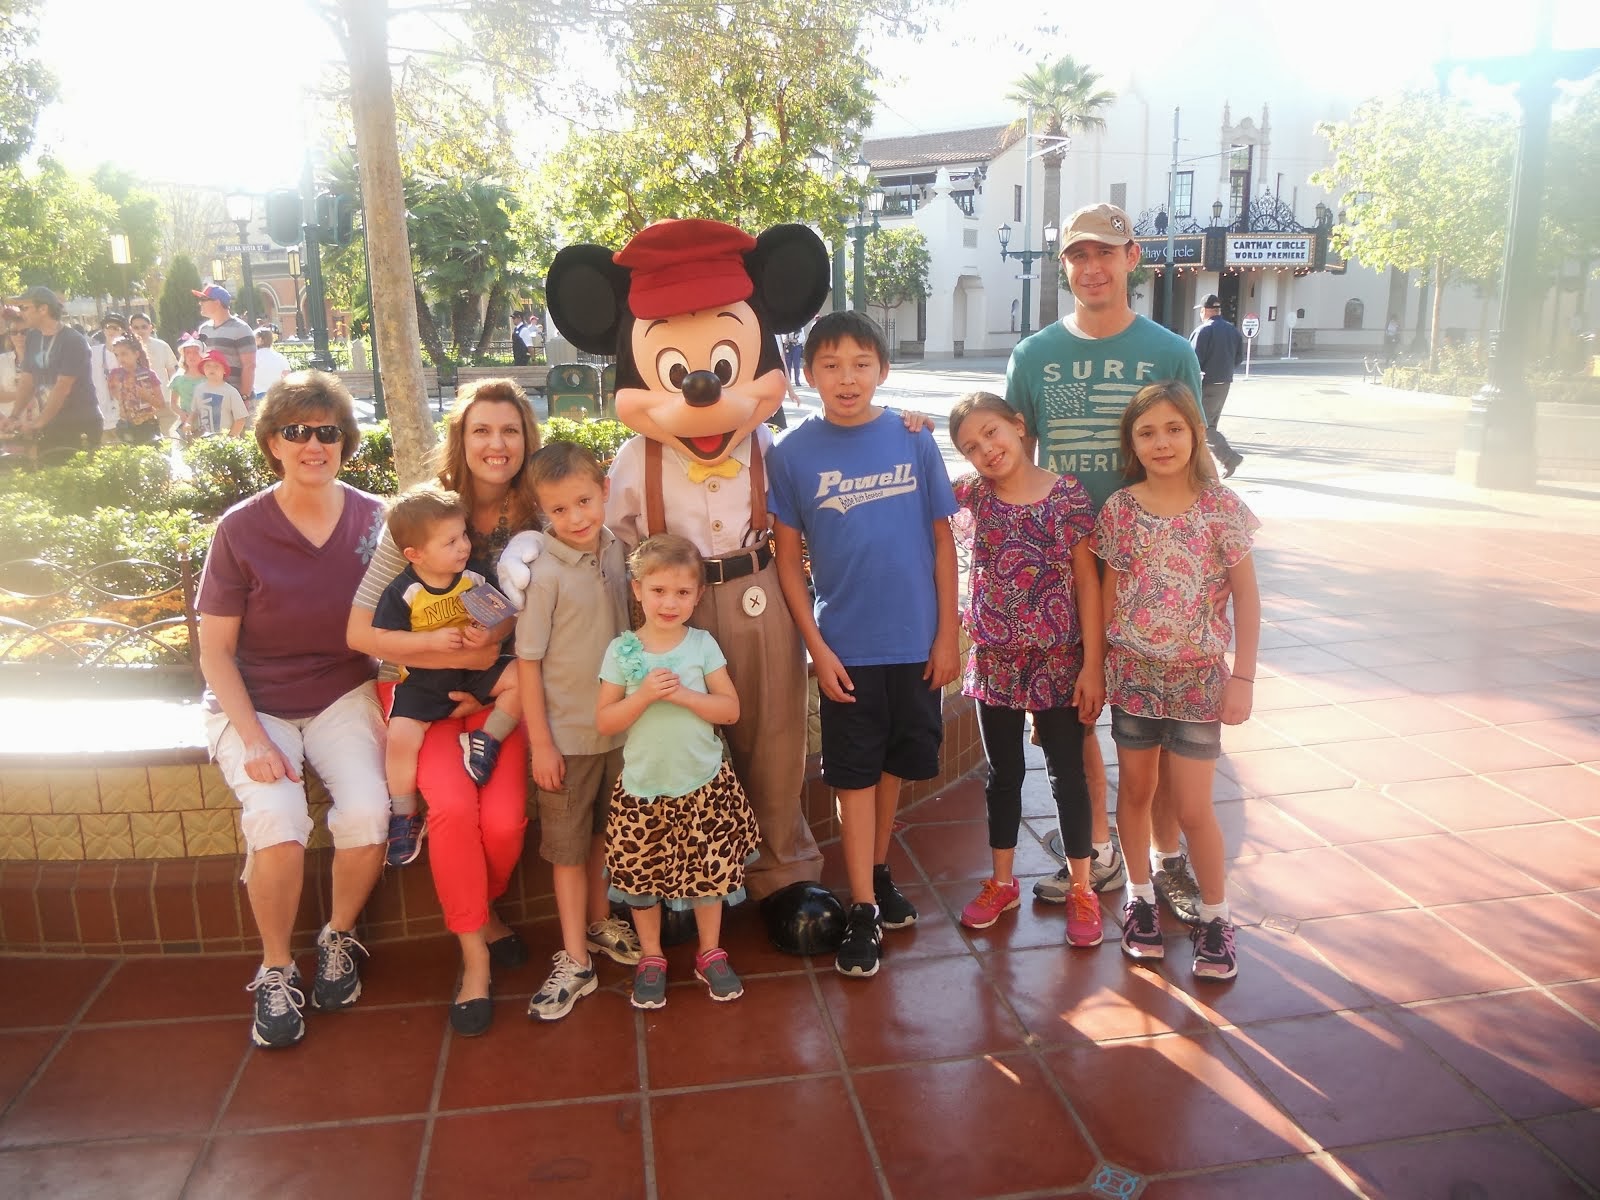 The happiest place on earth...is right where I wanna be...with my own family!